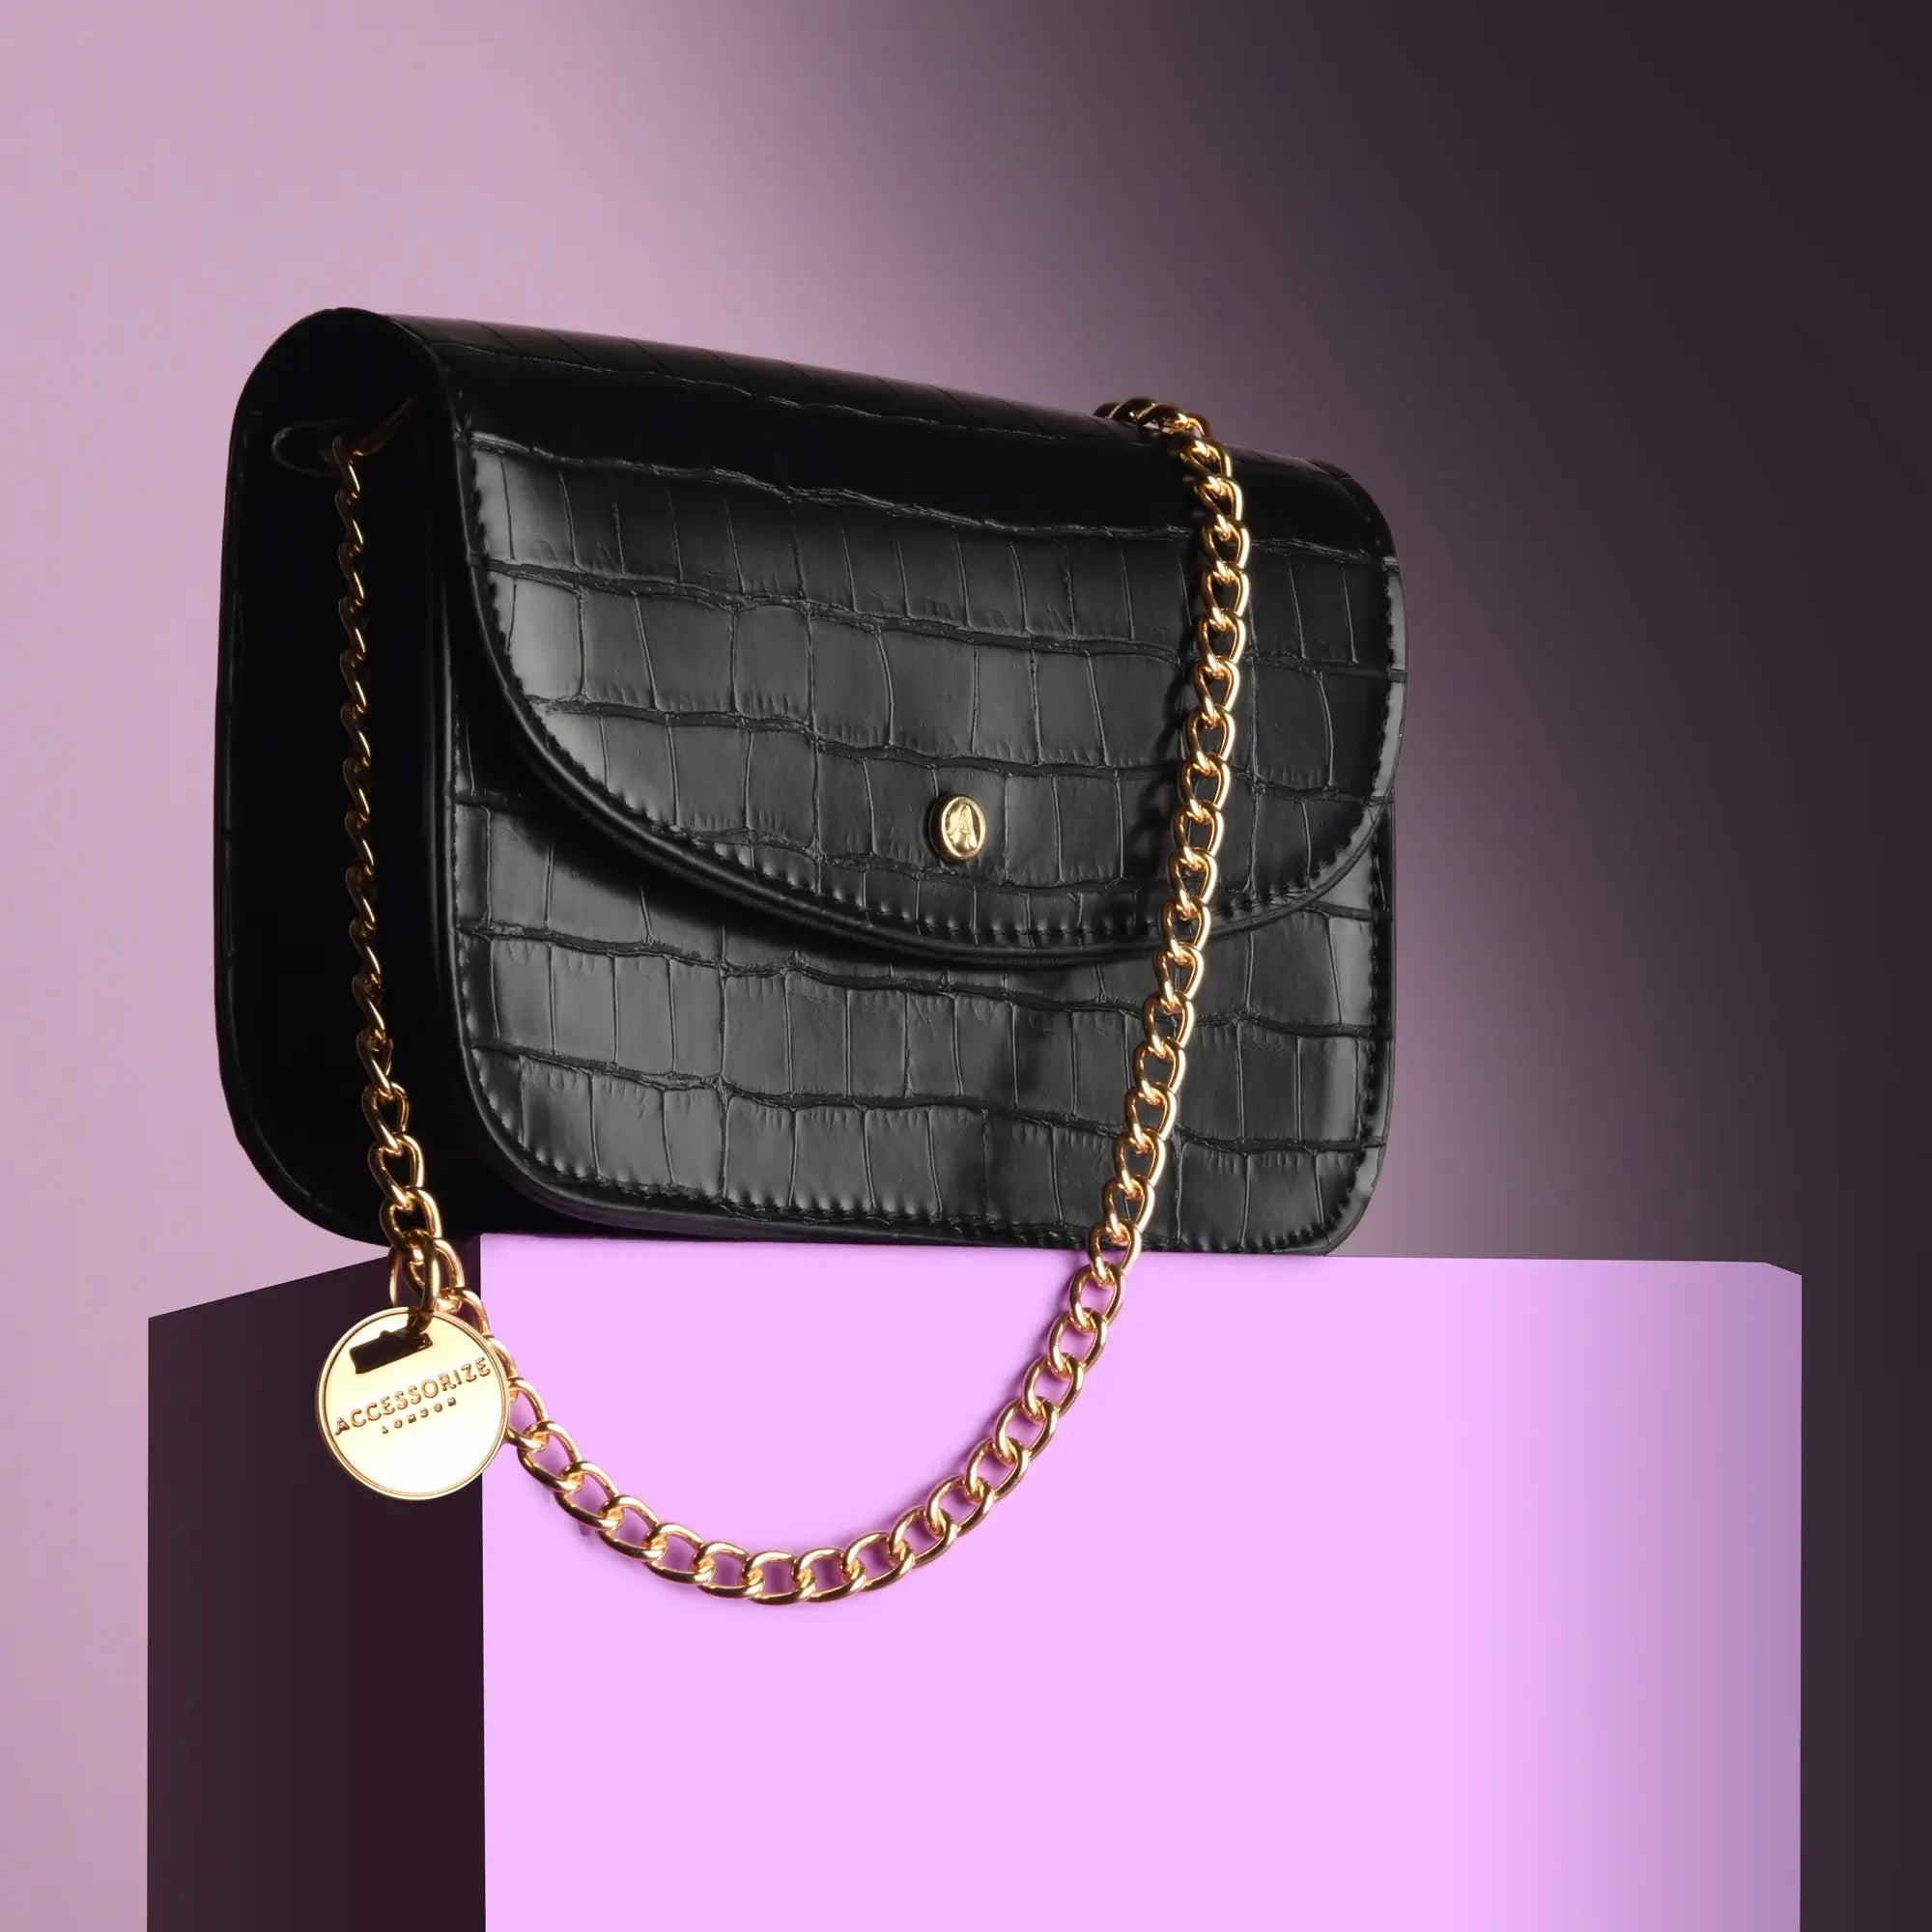 Leather Purse | Stylish Handbag | Casual Bags | Get up to 60% off